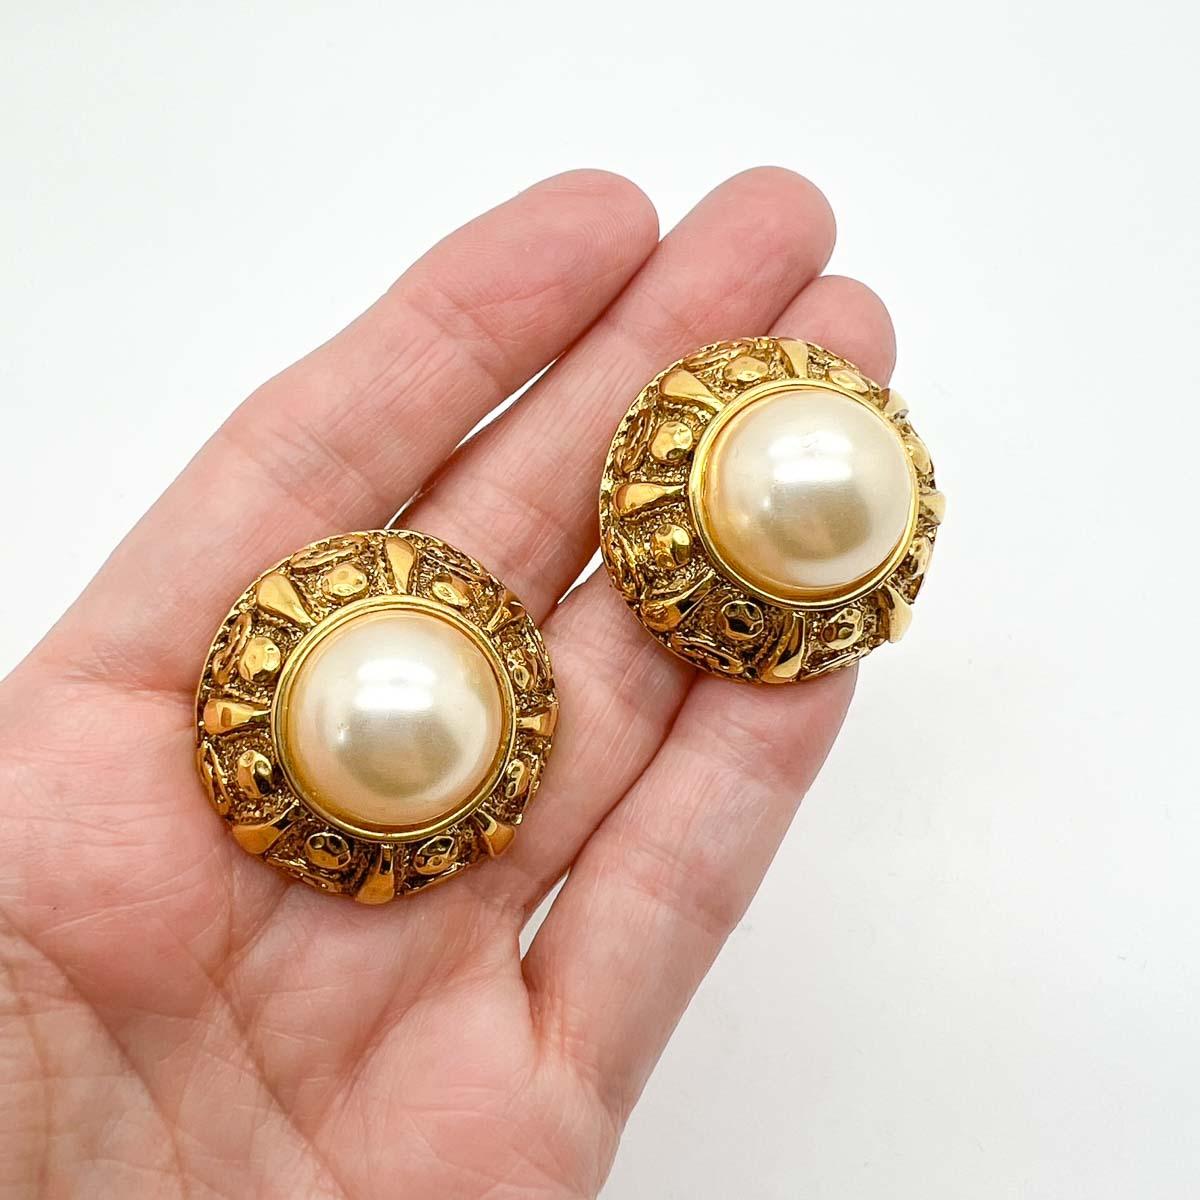 A wonderful pair of French couture vintage Etruscan pearl earrings dating to the 1980s. A stunning embossed gallery frames the large lustrous half pearls. Quintessentially 80s and forever chic. Owing to the construction, pattern, and design these